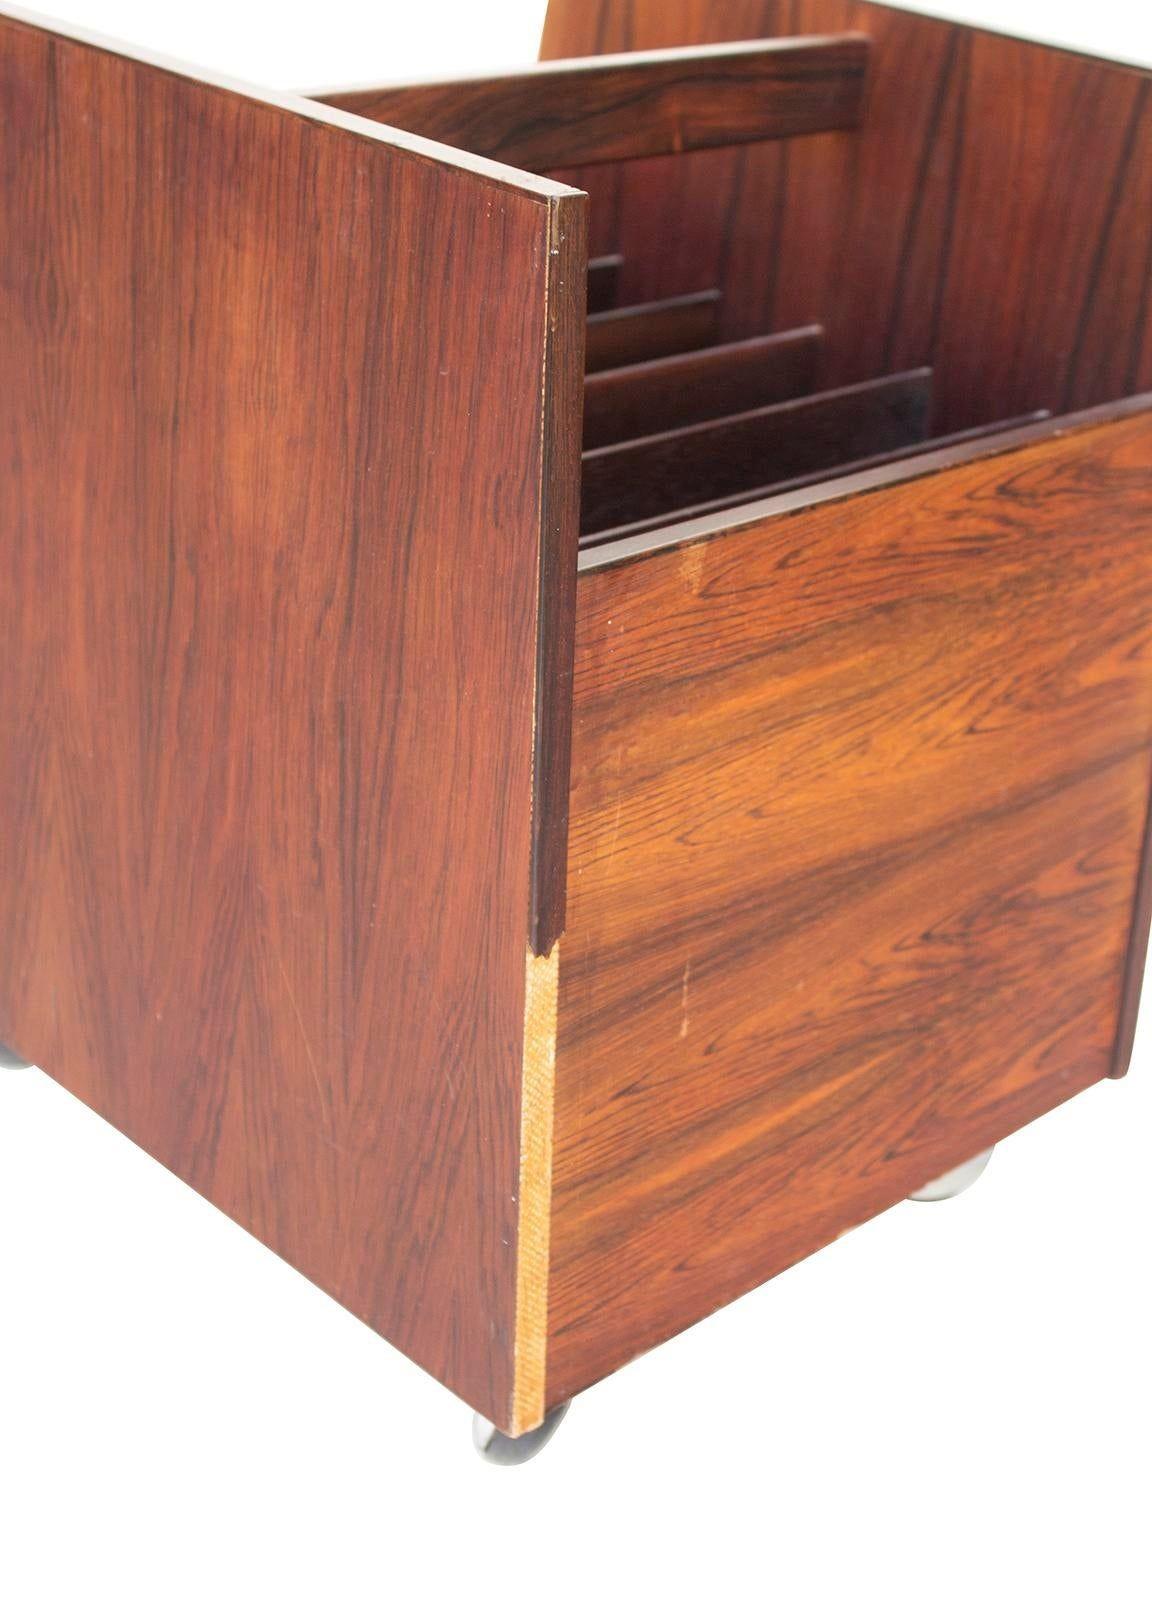 Rolling Lp Record or Magazine Caddy in Rosewood by Bruksbo For Sale 3